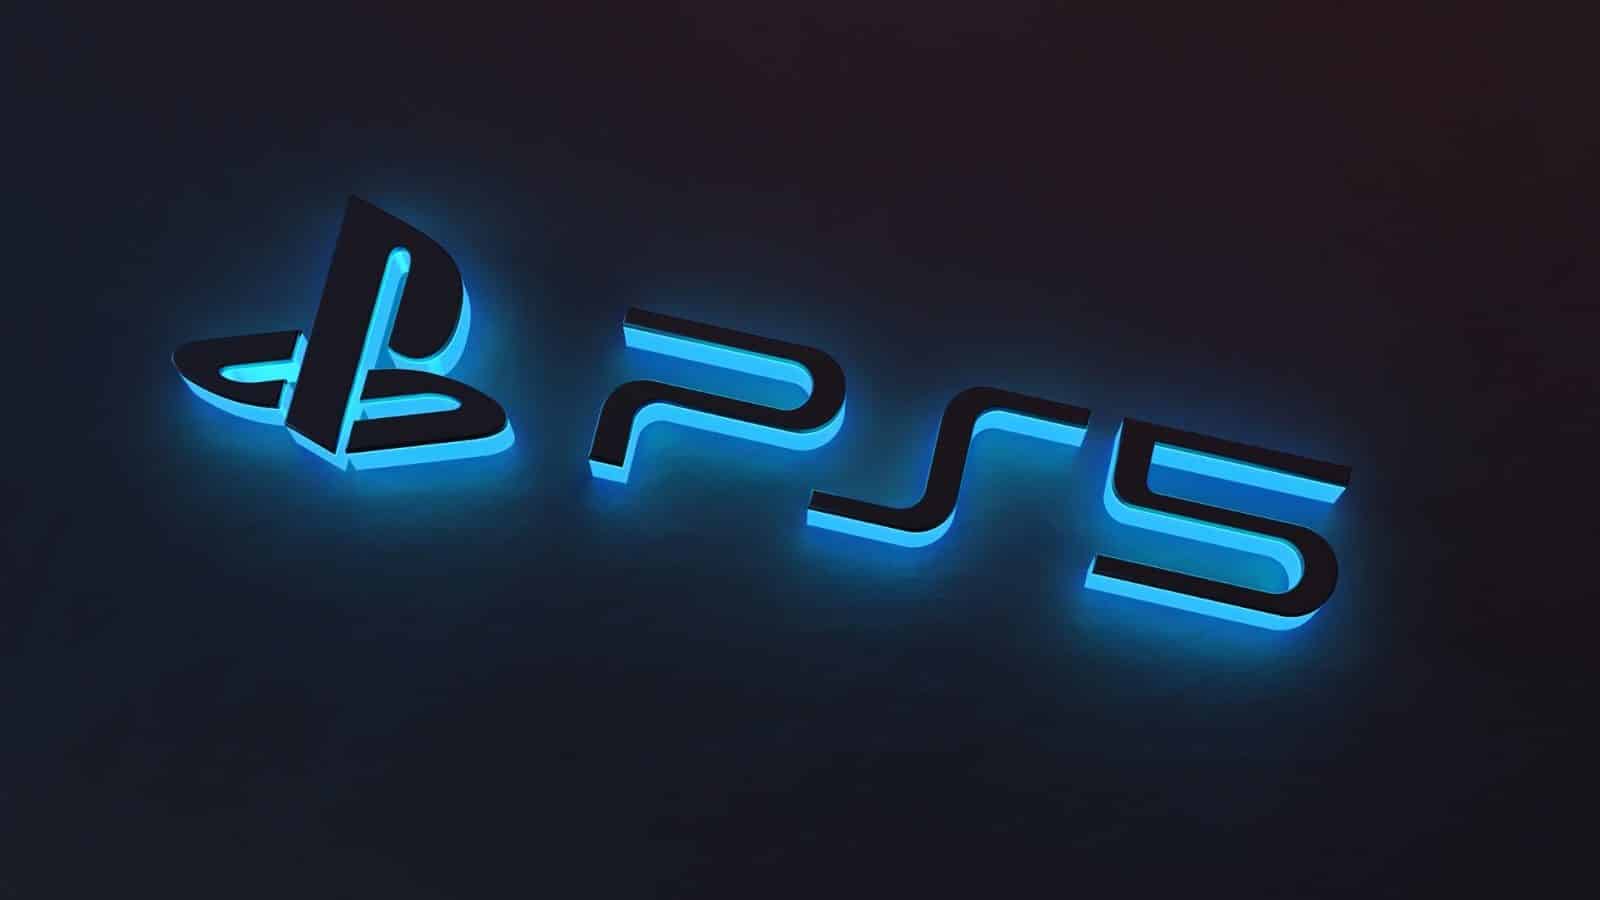 Ps5 Logo Wallpaper 4K Sony ps4 dualshock 4 close up photography of ...